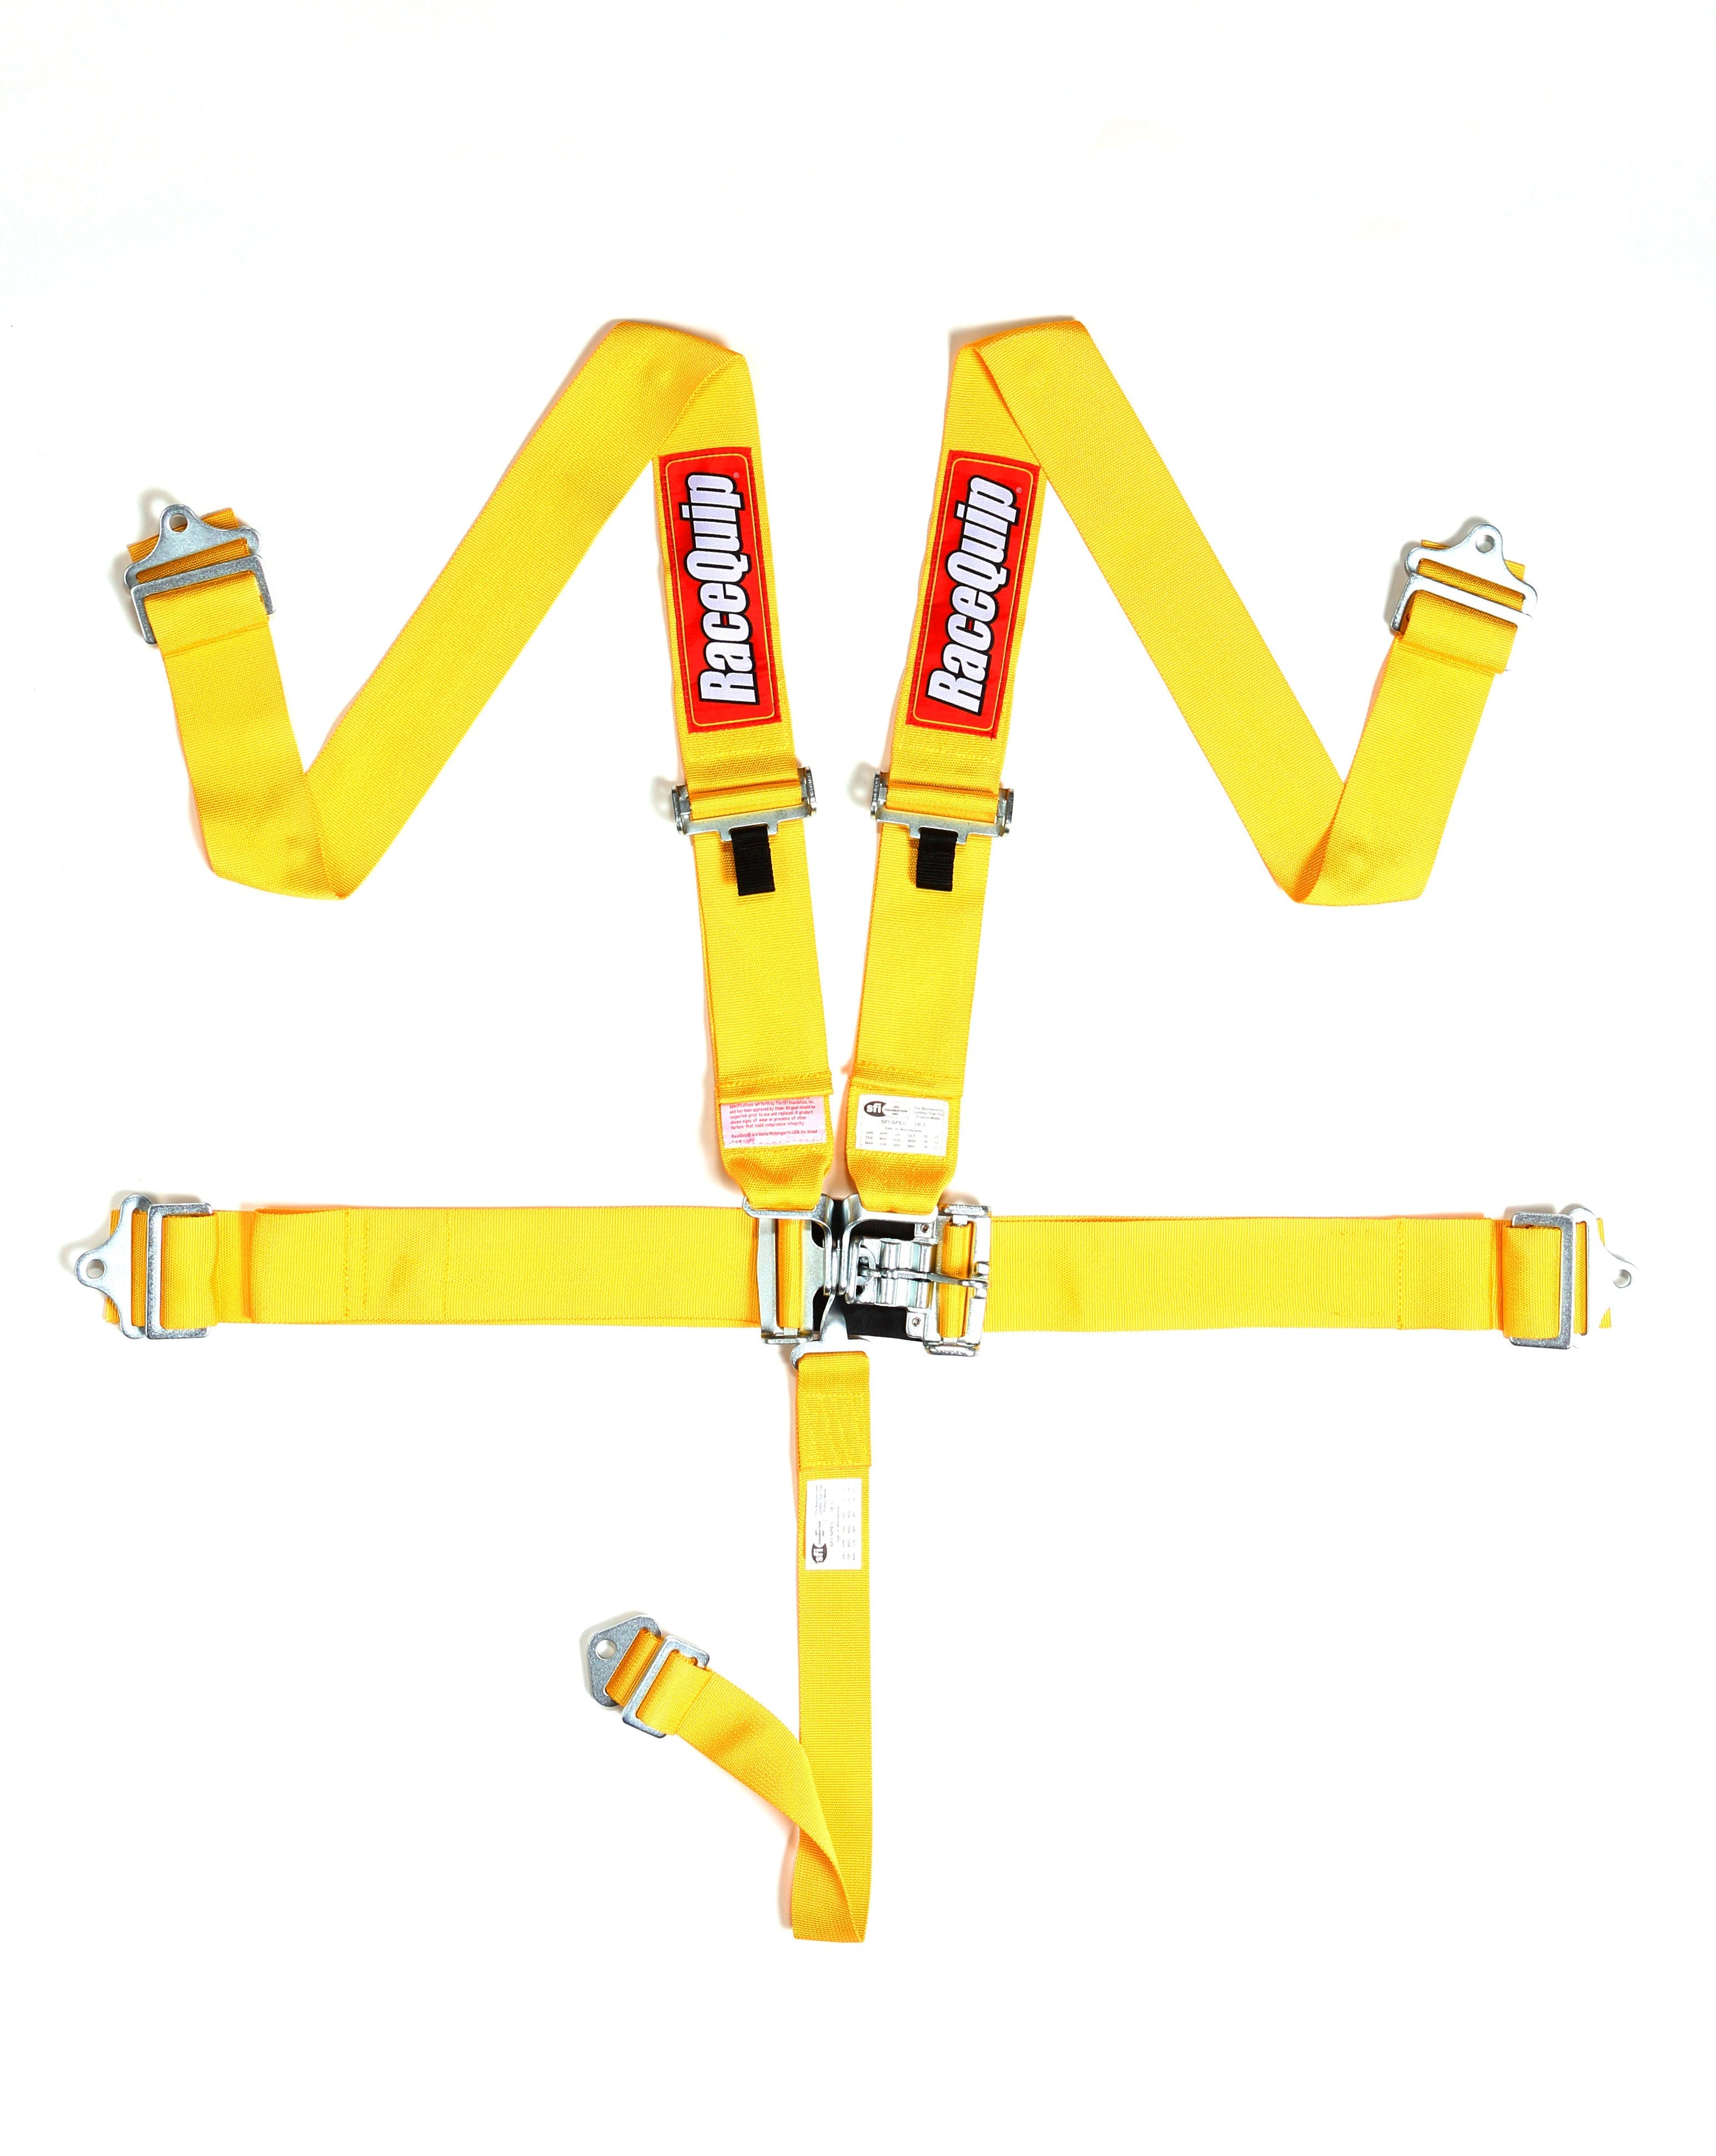 RaceQuip 711031 SFI 16.1 Latch and Link 5-Point Racing Harness Set (Yellow)